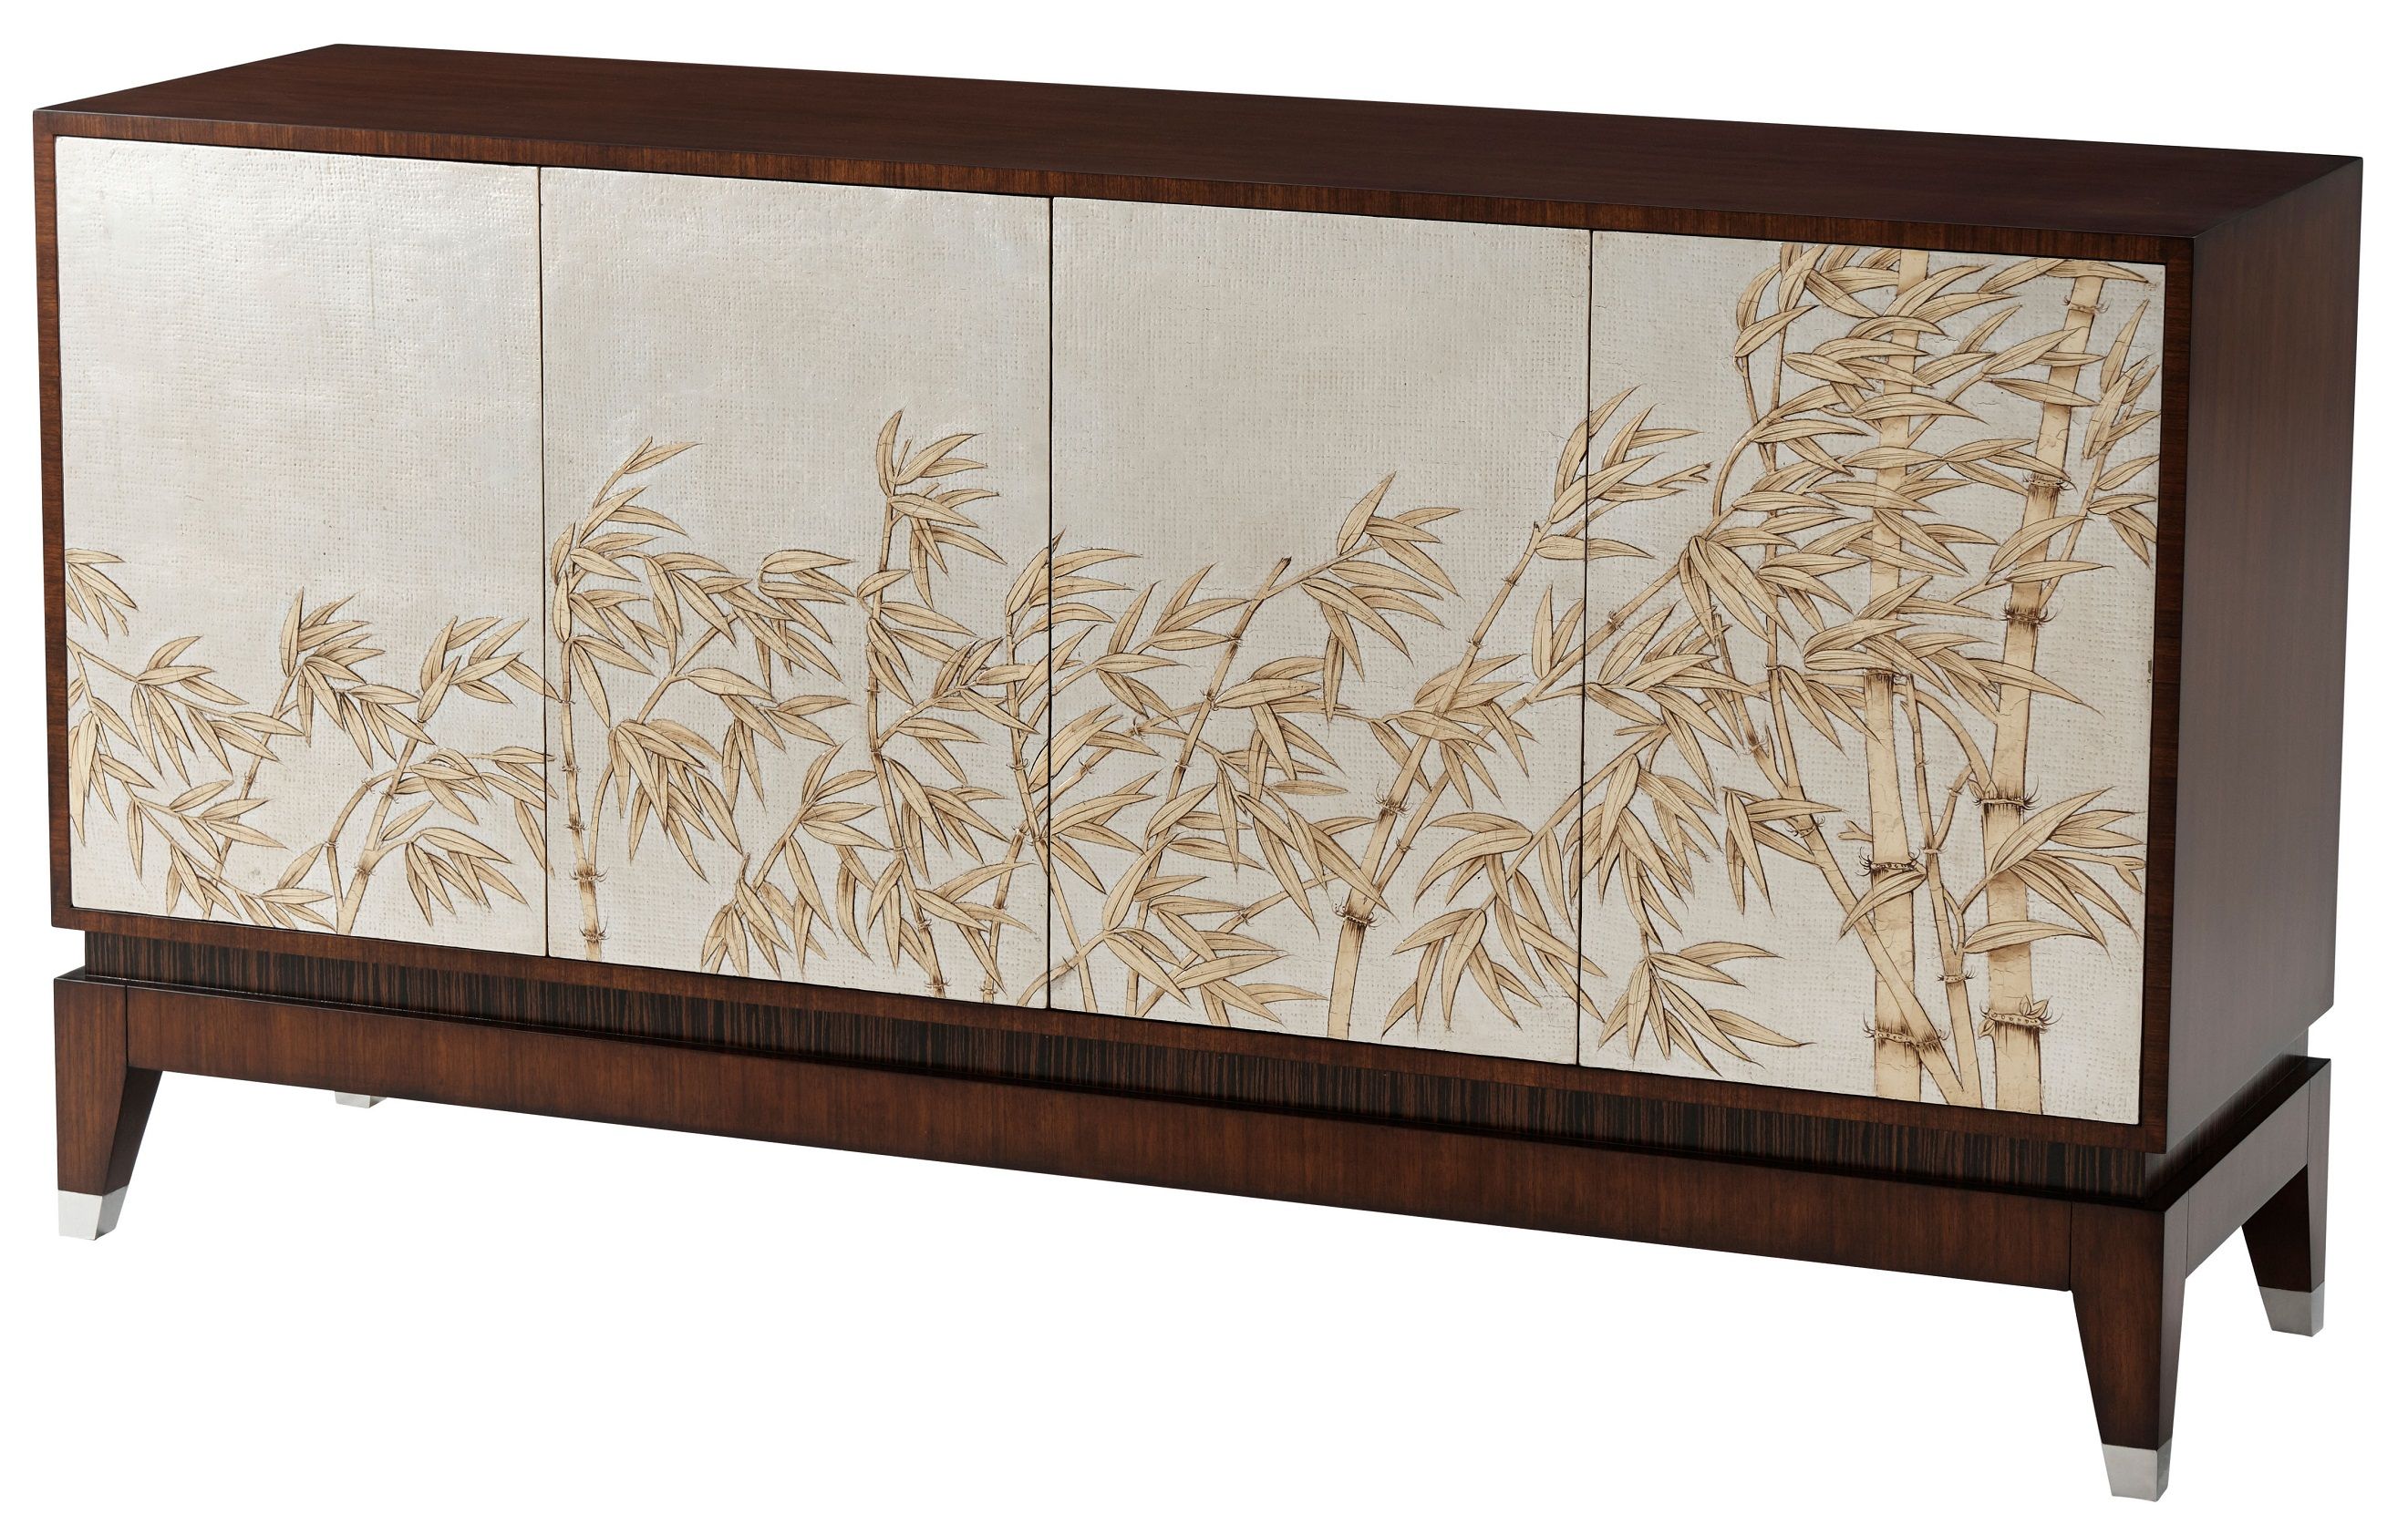 This is a buffet made of Hyedua wood veneer. It has a rectangular top and four silver Argento doors